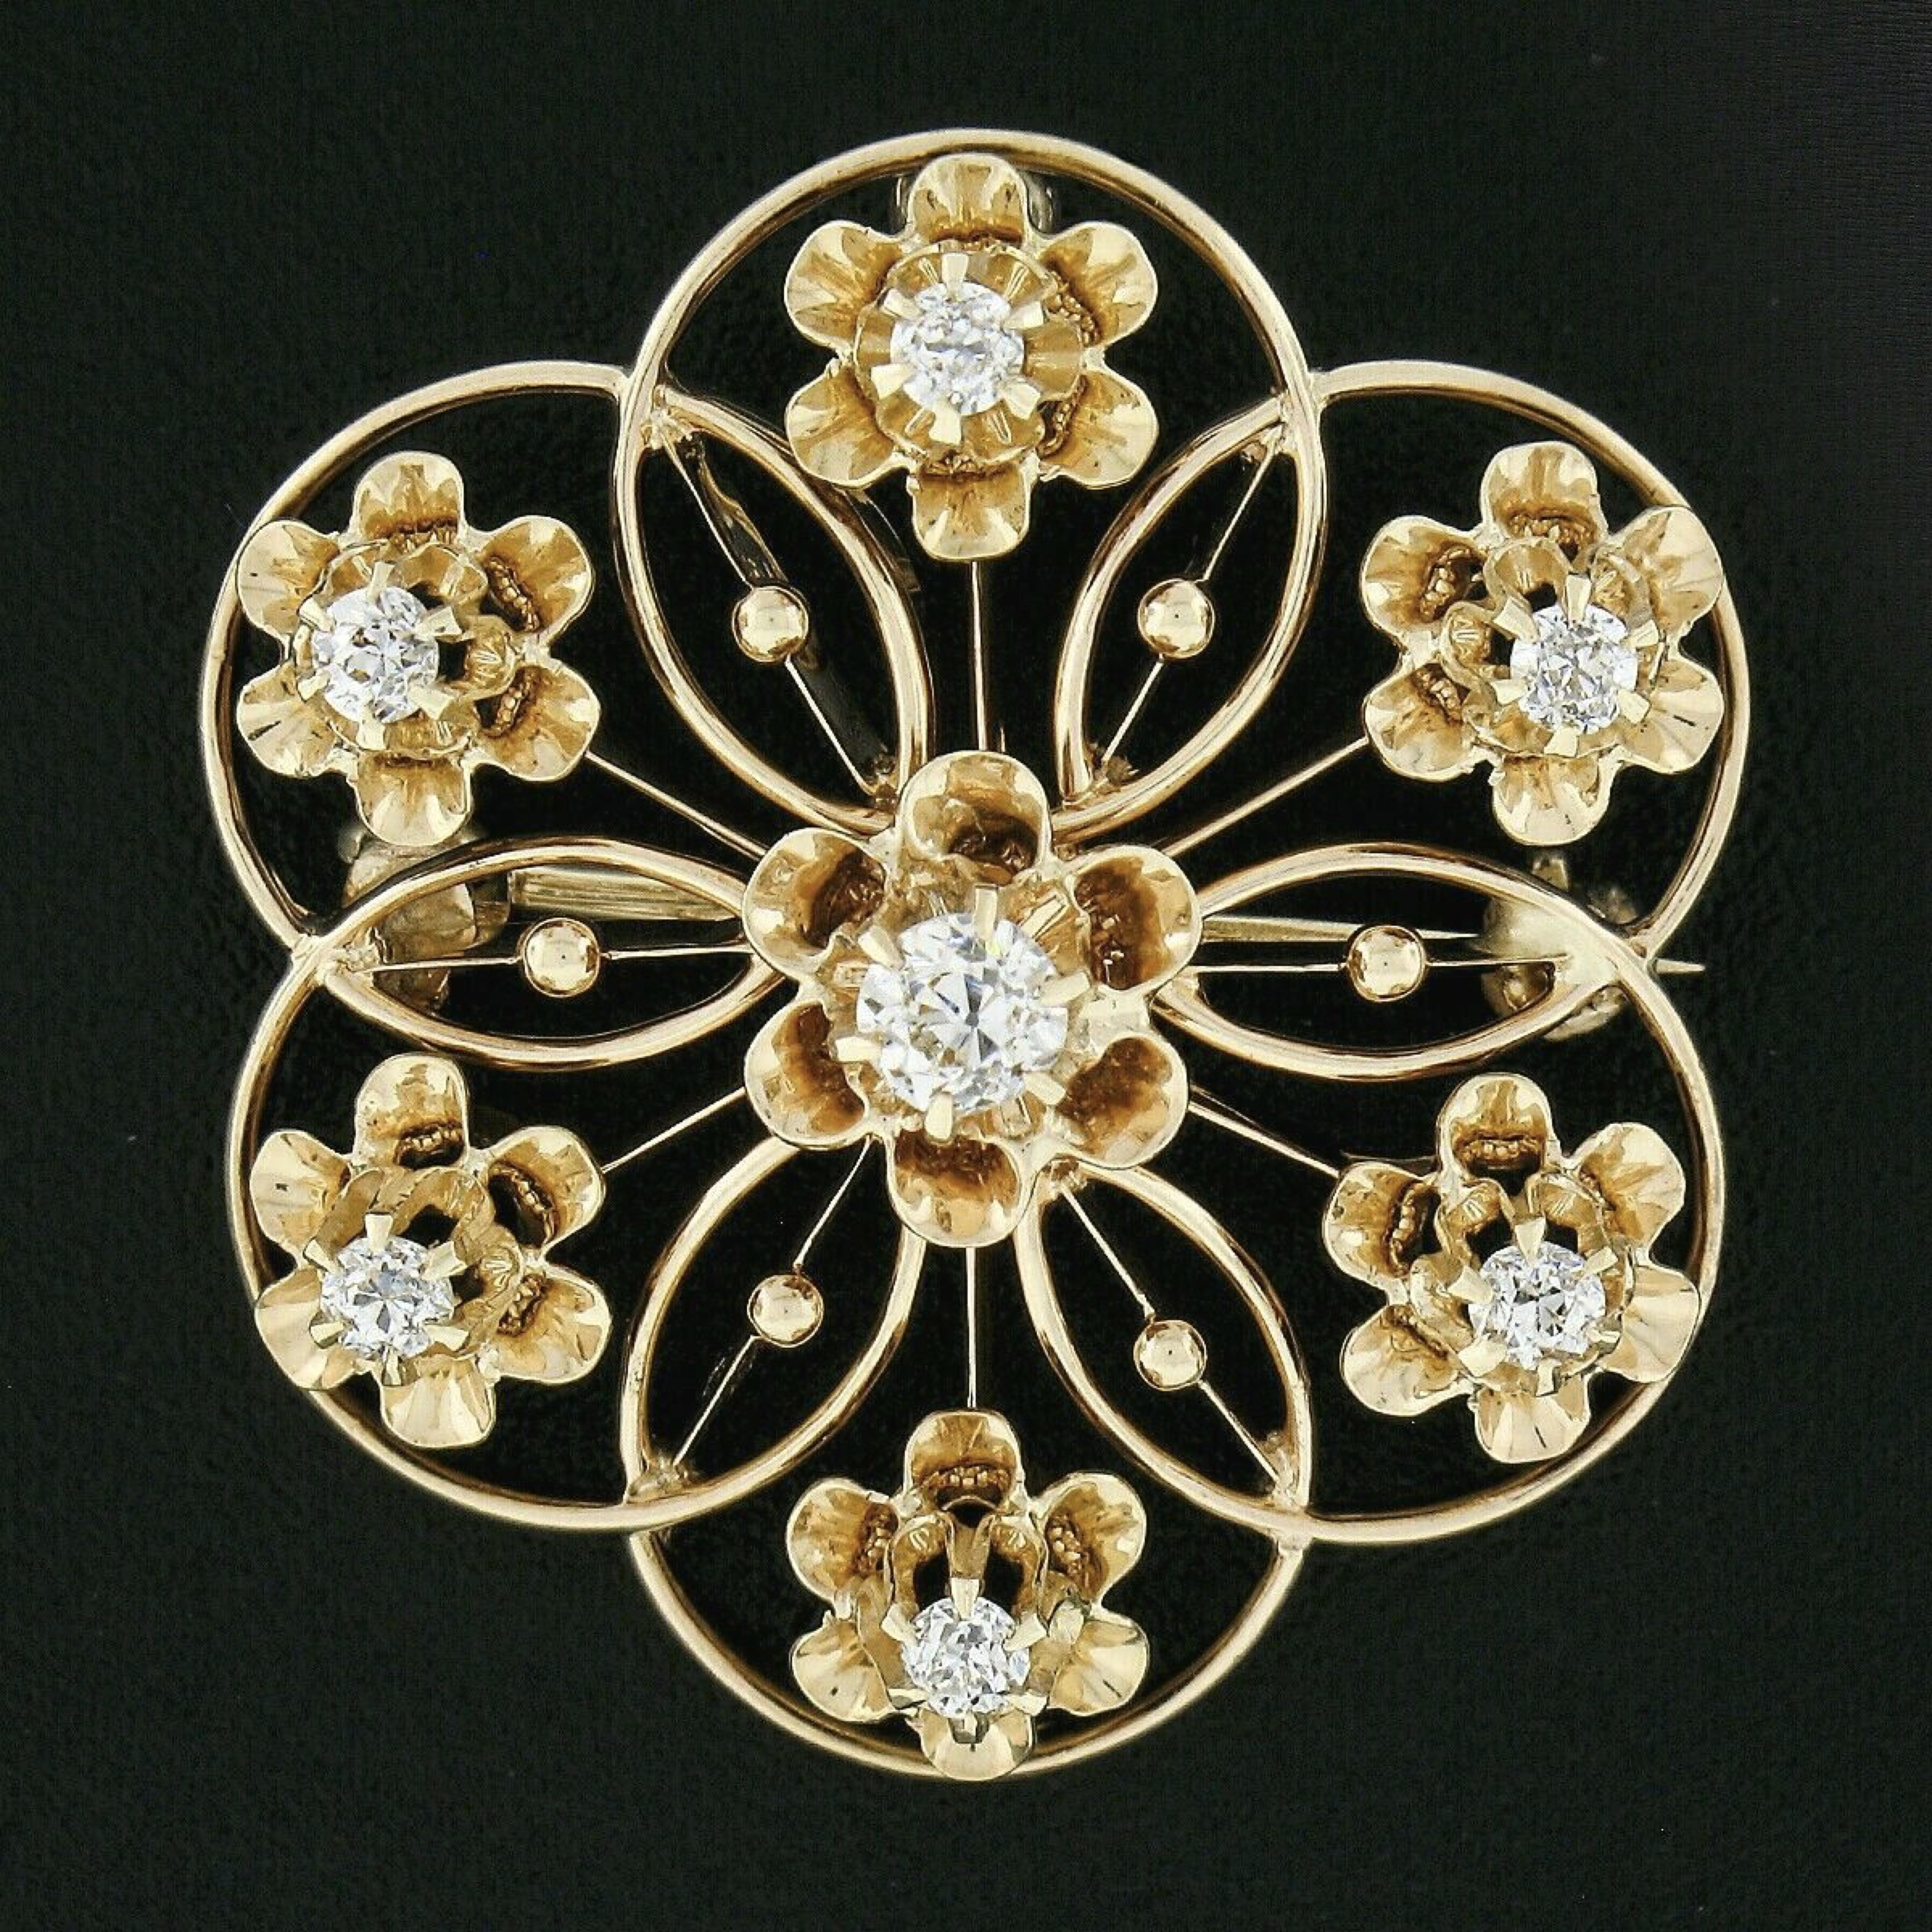 This gorgeous antique brooch or pendant was crafted in solid 14k yellow gold during the late Victorian era and features a gorgeous open work flower design that is set with 7 old European cut diamonds throughout. These stunning diamonds are elegantly